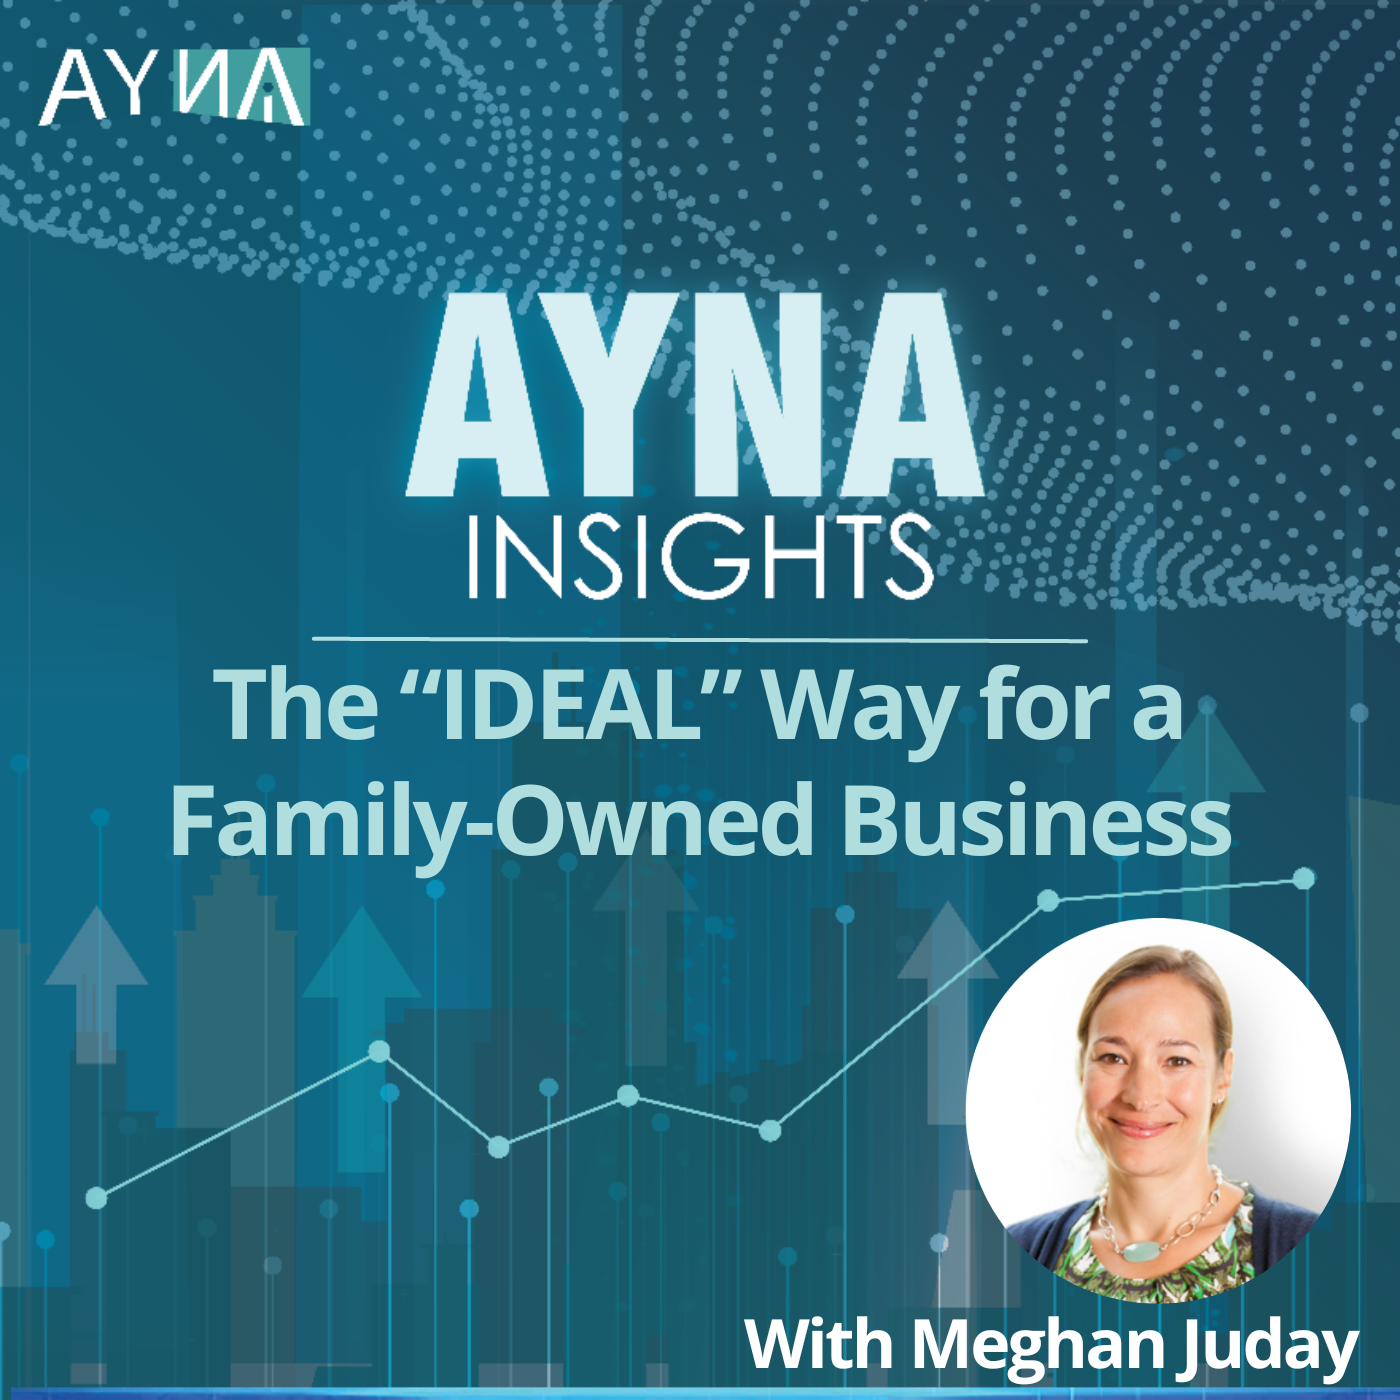 Meghan Juday: The “IDEAL” Way for a Family-Owned Business